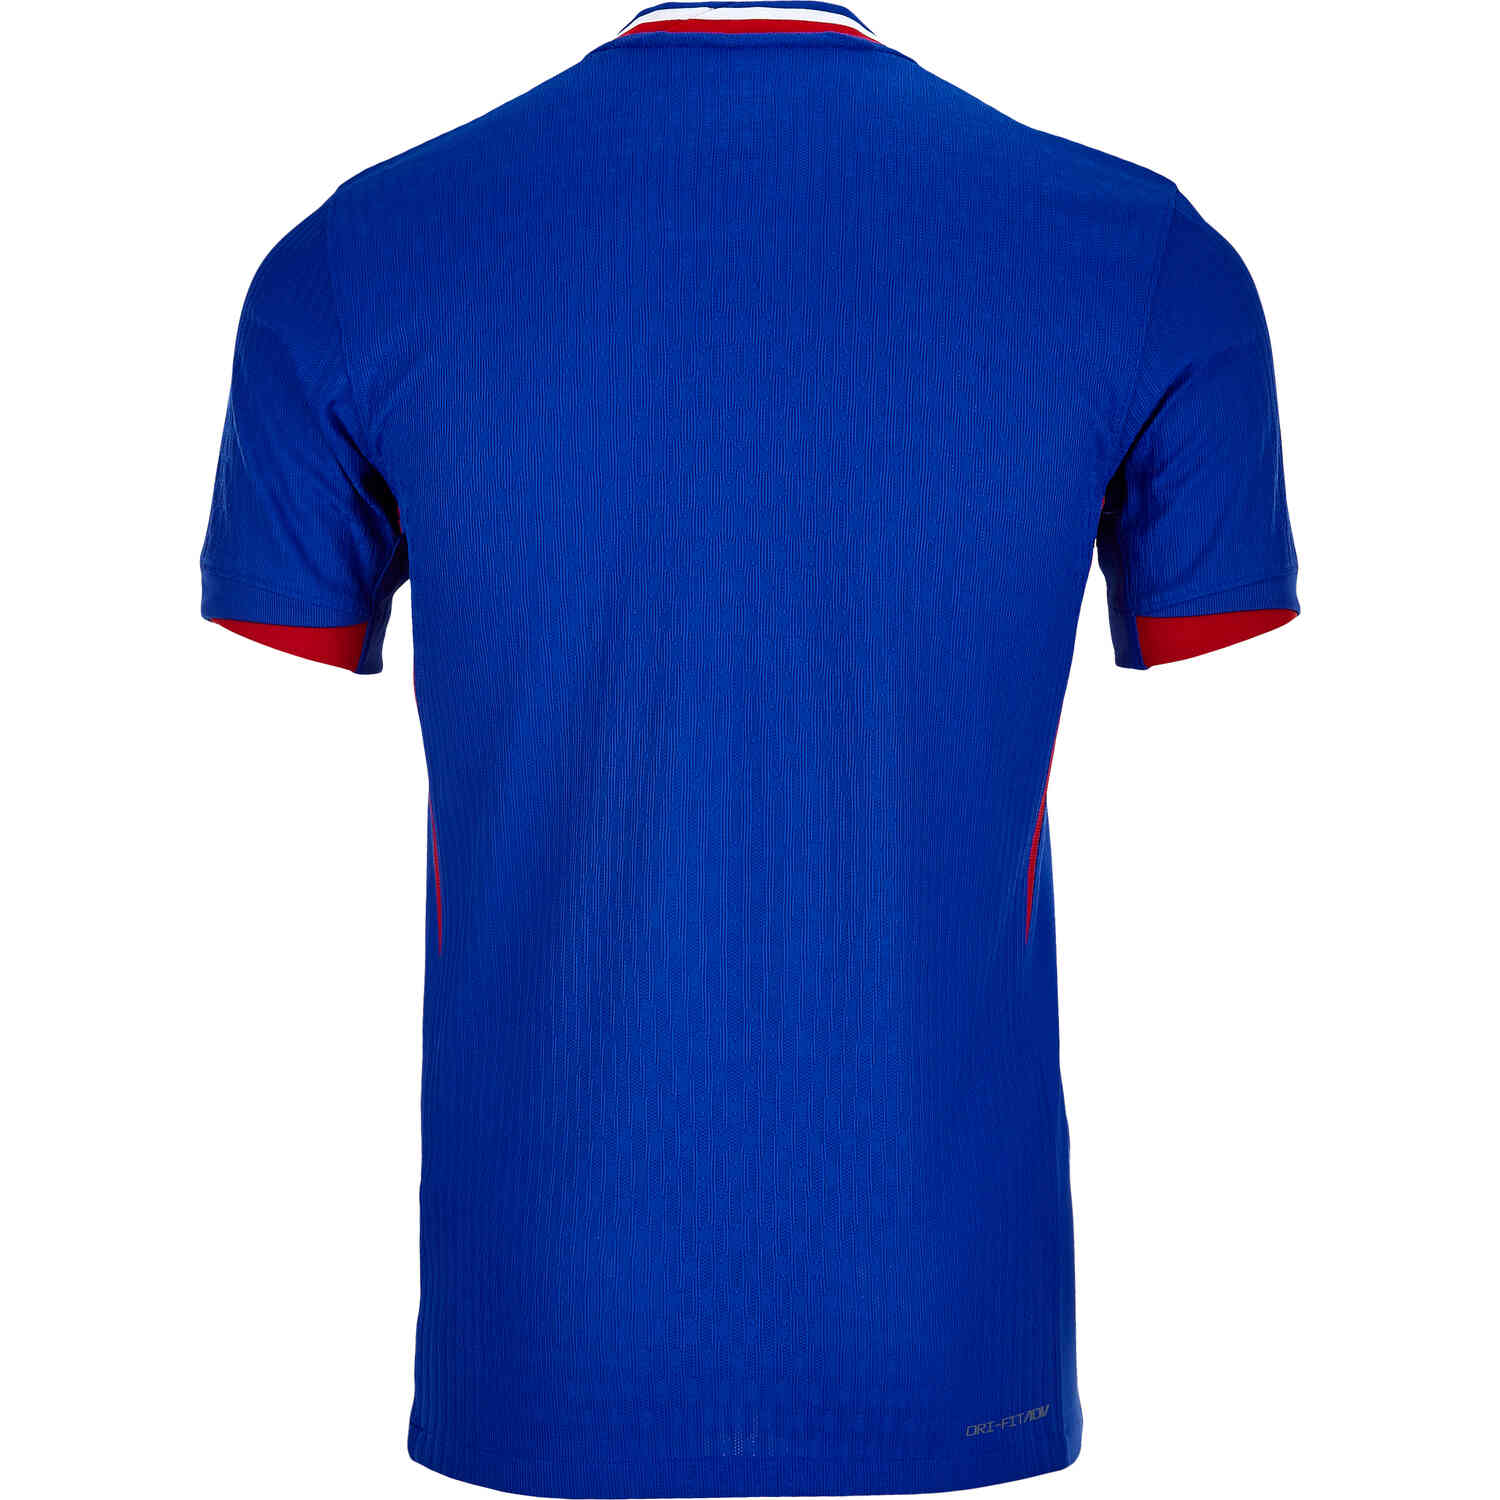 Nike France Home Match Jersey - Bright Blue/University Red/White ...